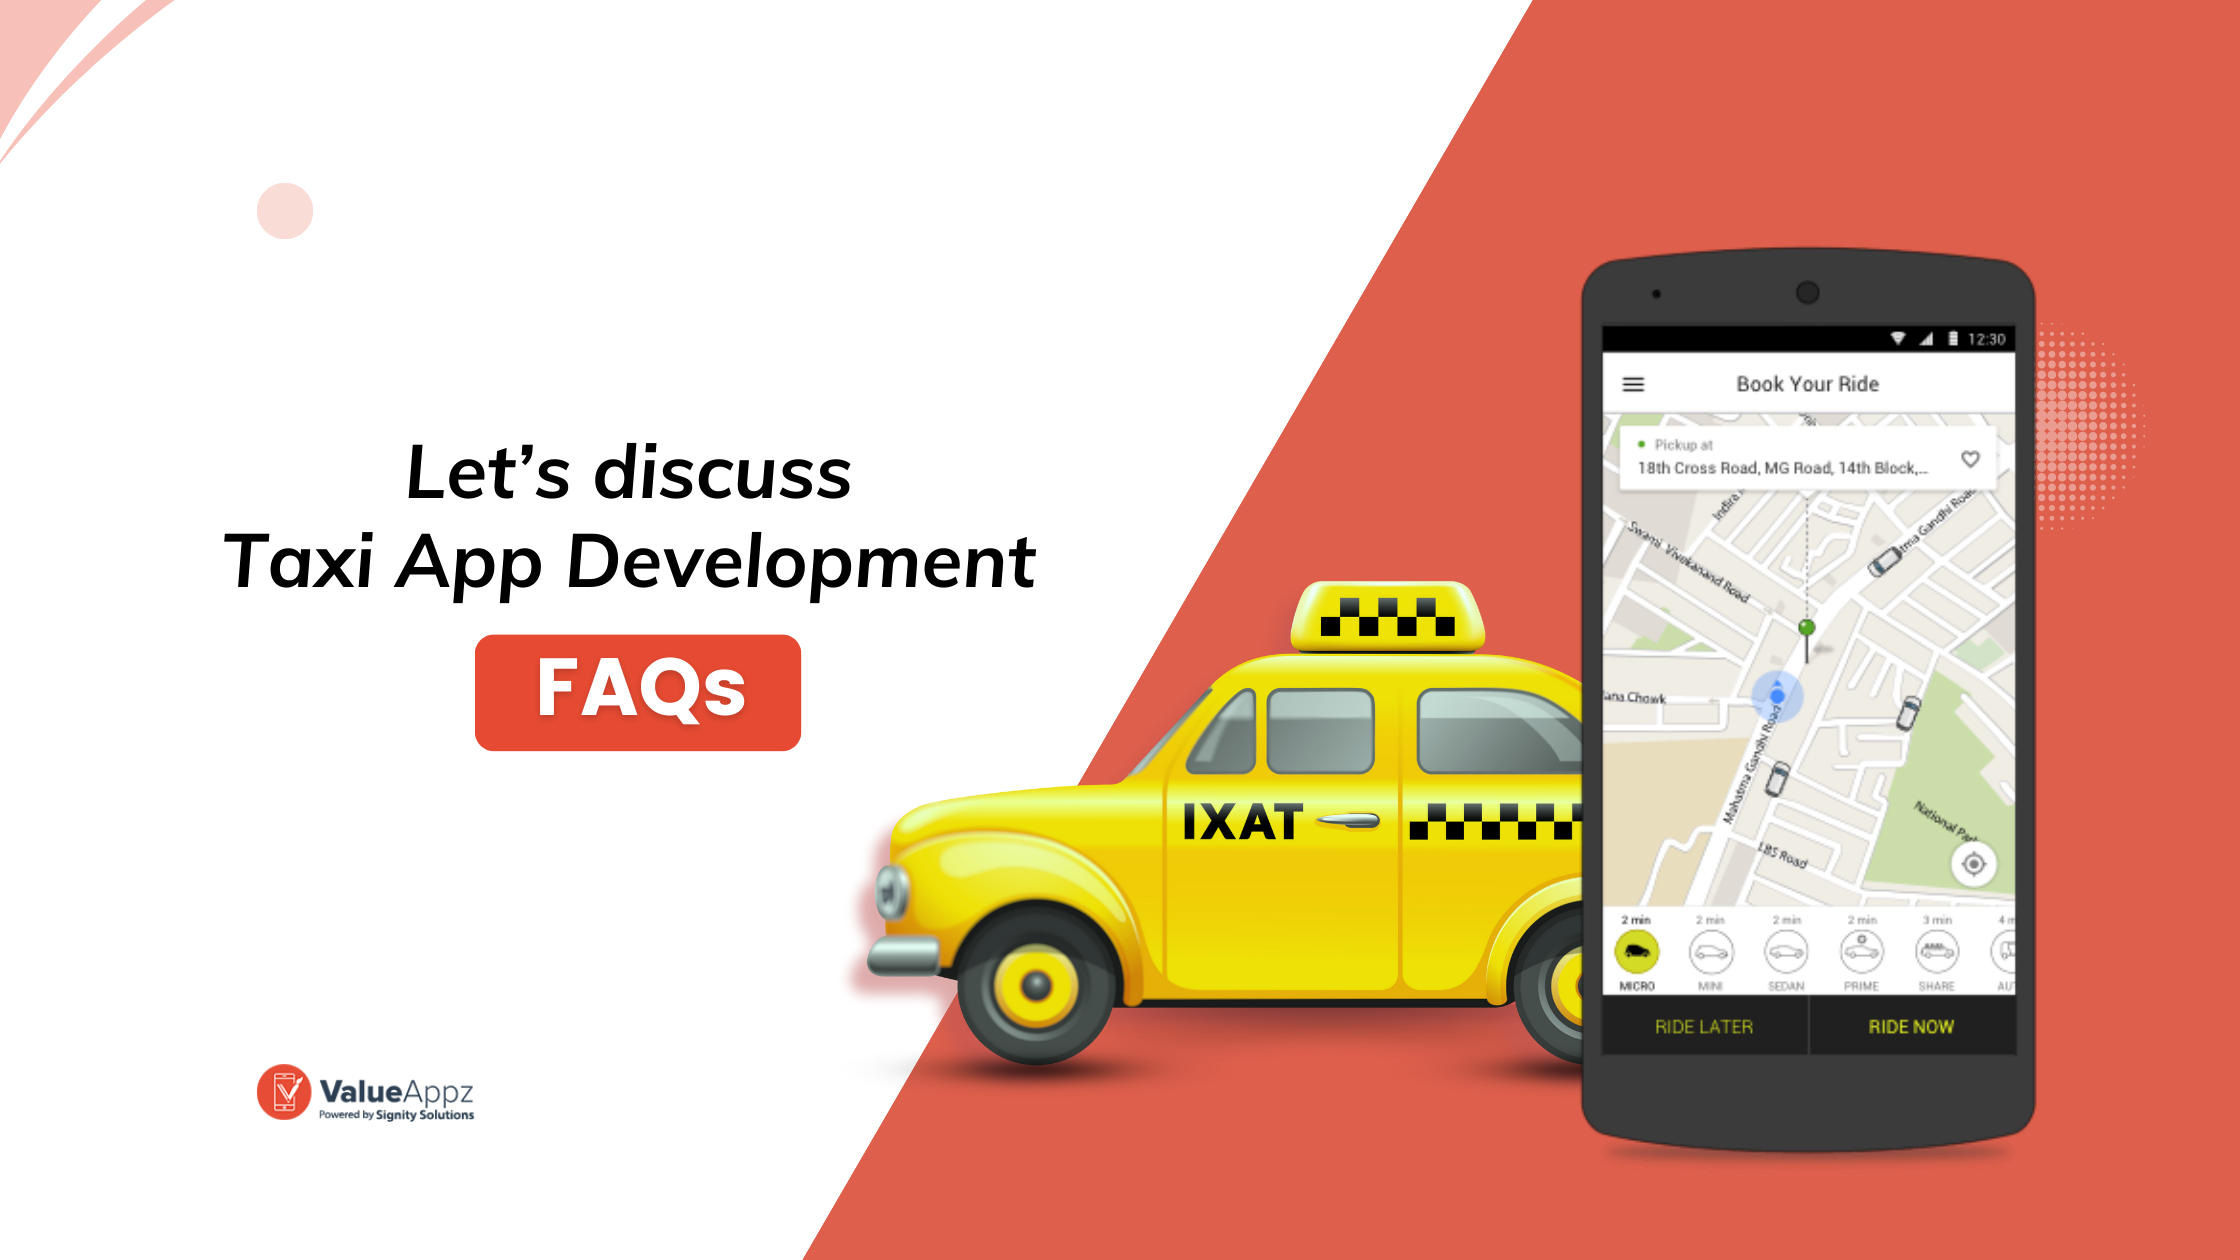 Your Taxi App Development Questions Answered: A Comprehensive FAQ Guide